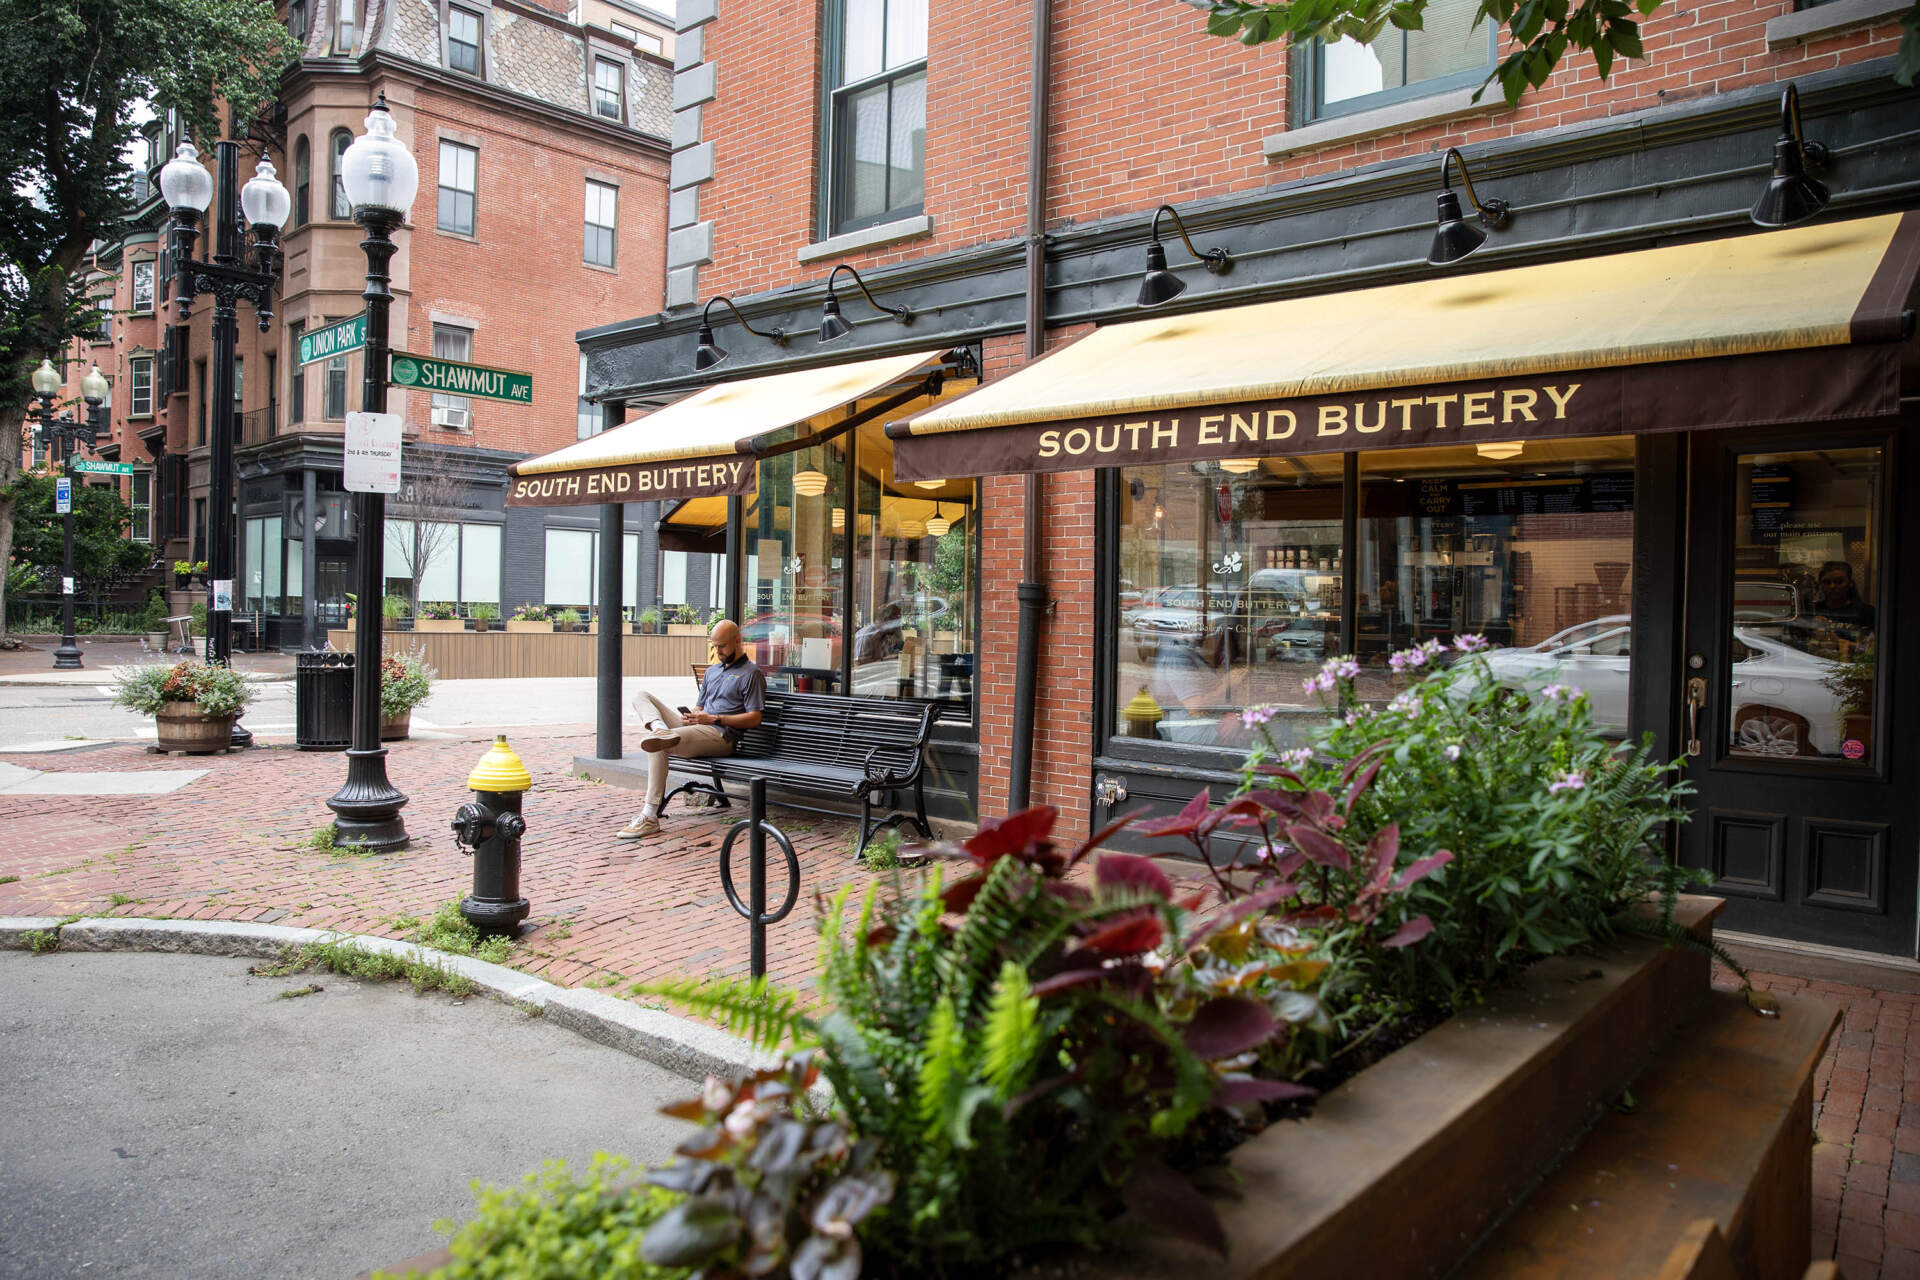 A man sits in the shade outside the South End Buttery on Shawmut Avenue in Boston. (Robin Lubbock/WBUR)